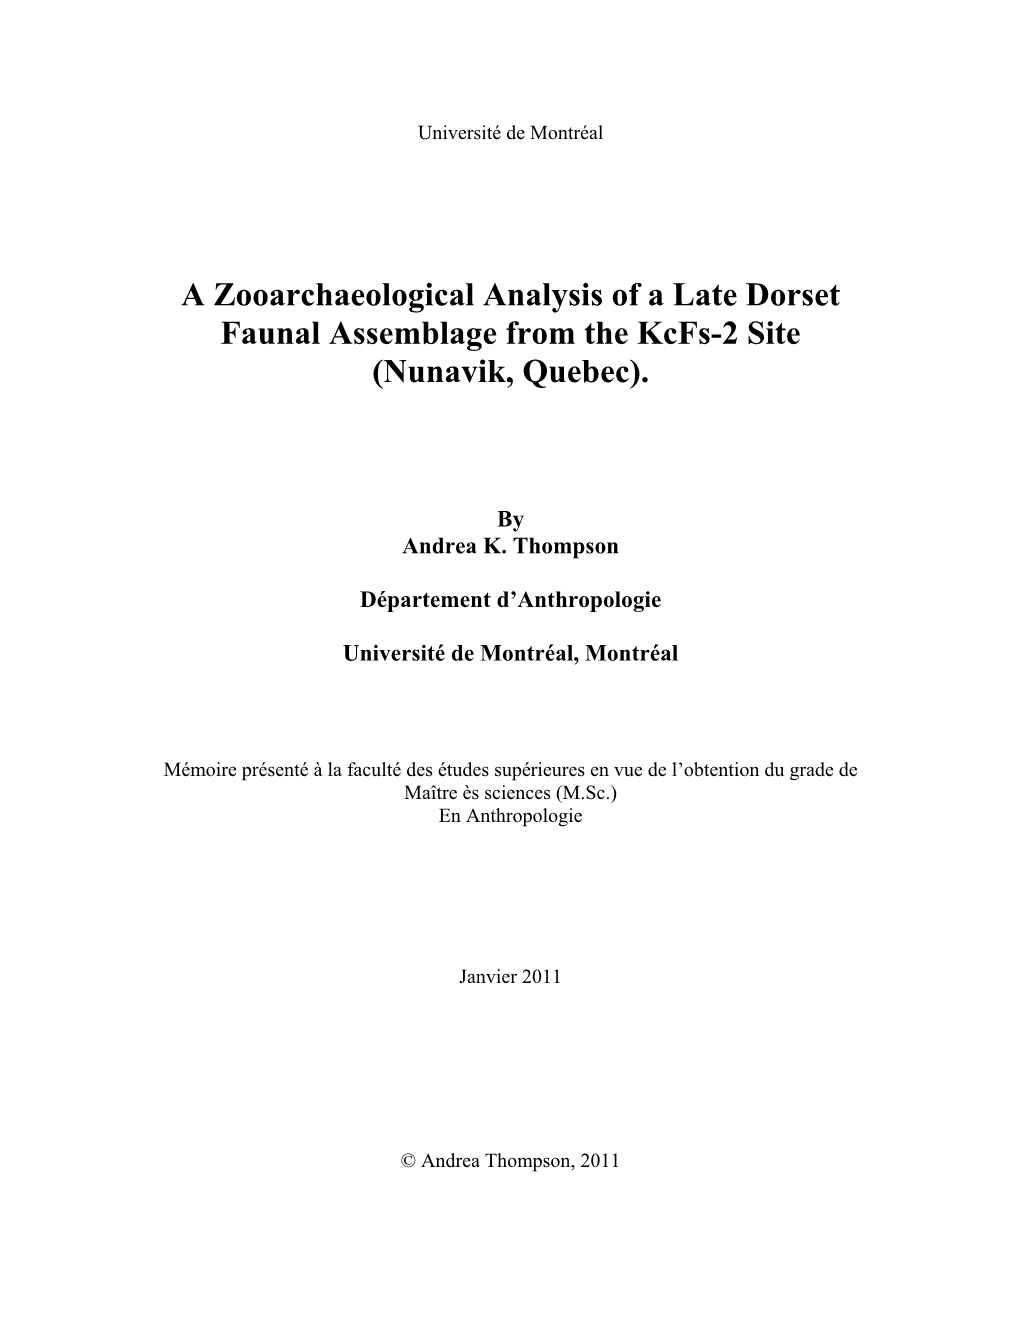 A Zooarchaeological Analysis of a Late Dorset Faunal Assemblage from the Kcfs-2 Site (Nunavik, Quebec)